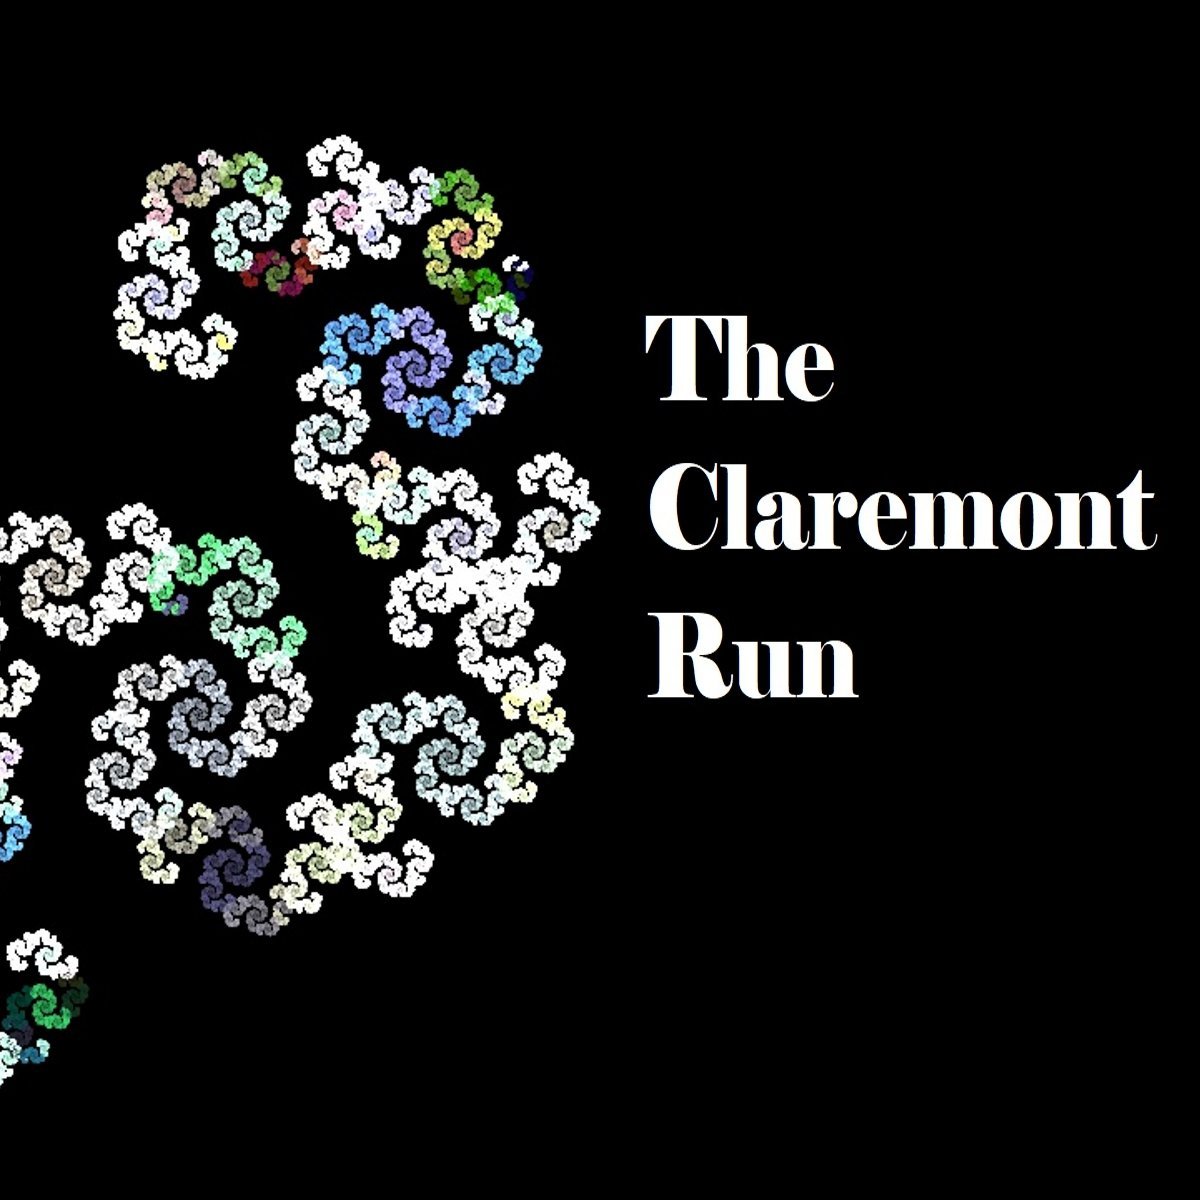 The Claremont Run is a SSHRC-funded academic initiative micro-publishing data-based analysis of Chris Claremont's 16 year run on Uncanny X-Men and spinoffs.